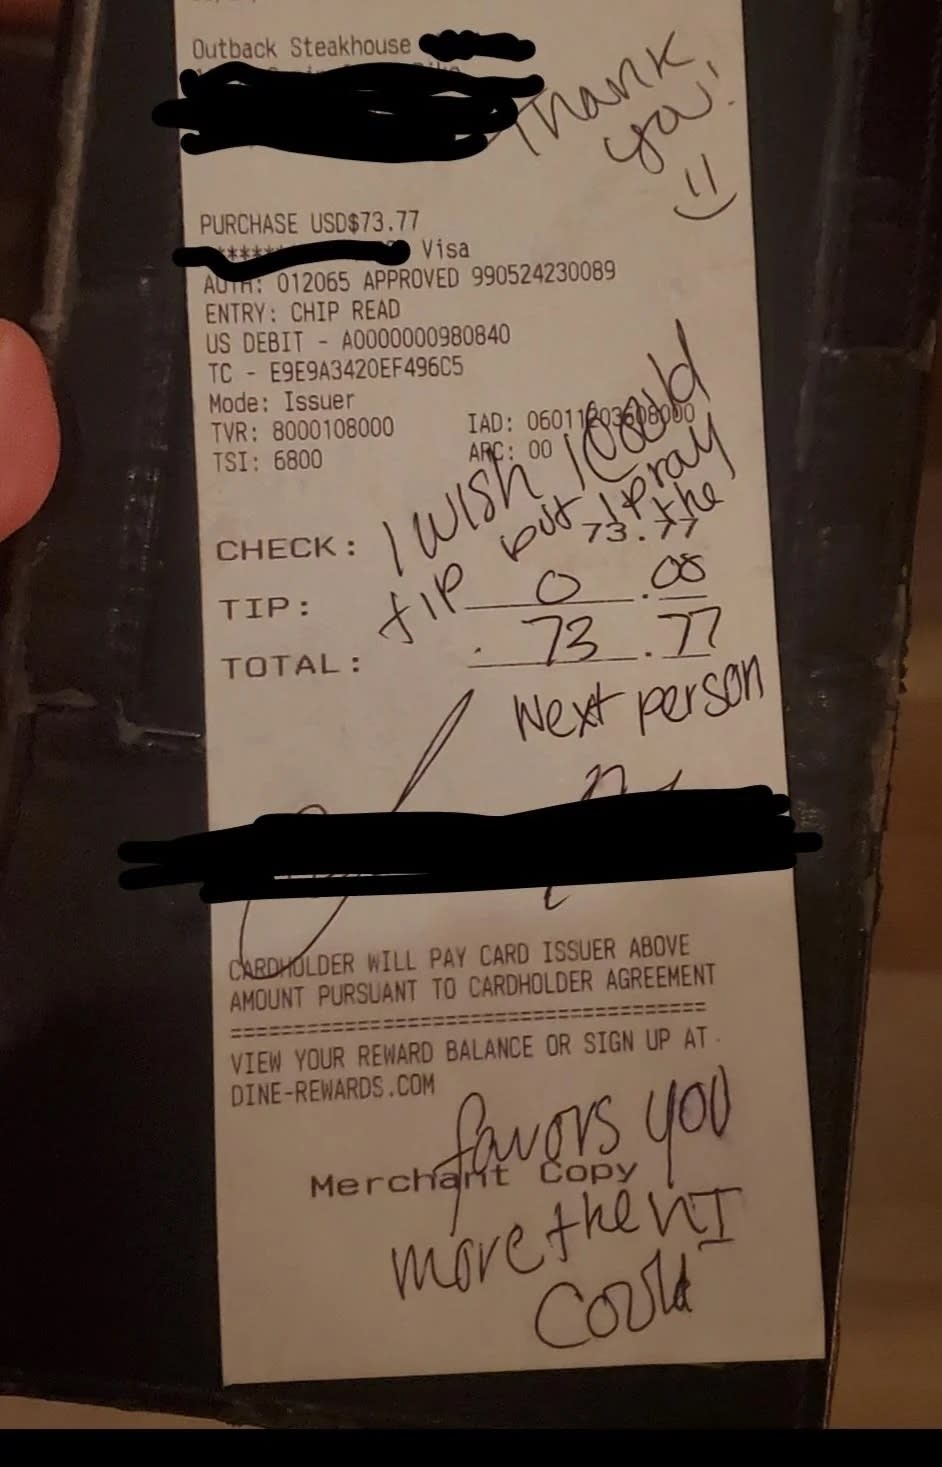 Receipt with handwritten message, "Tips for you" and "Pay it forward, next person." Total and tip amounts are crossed out